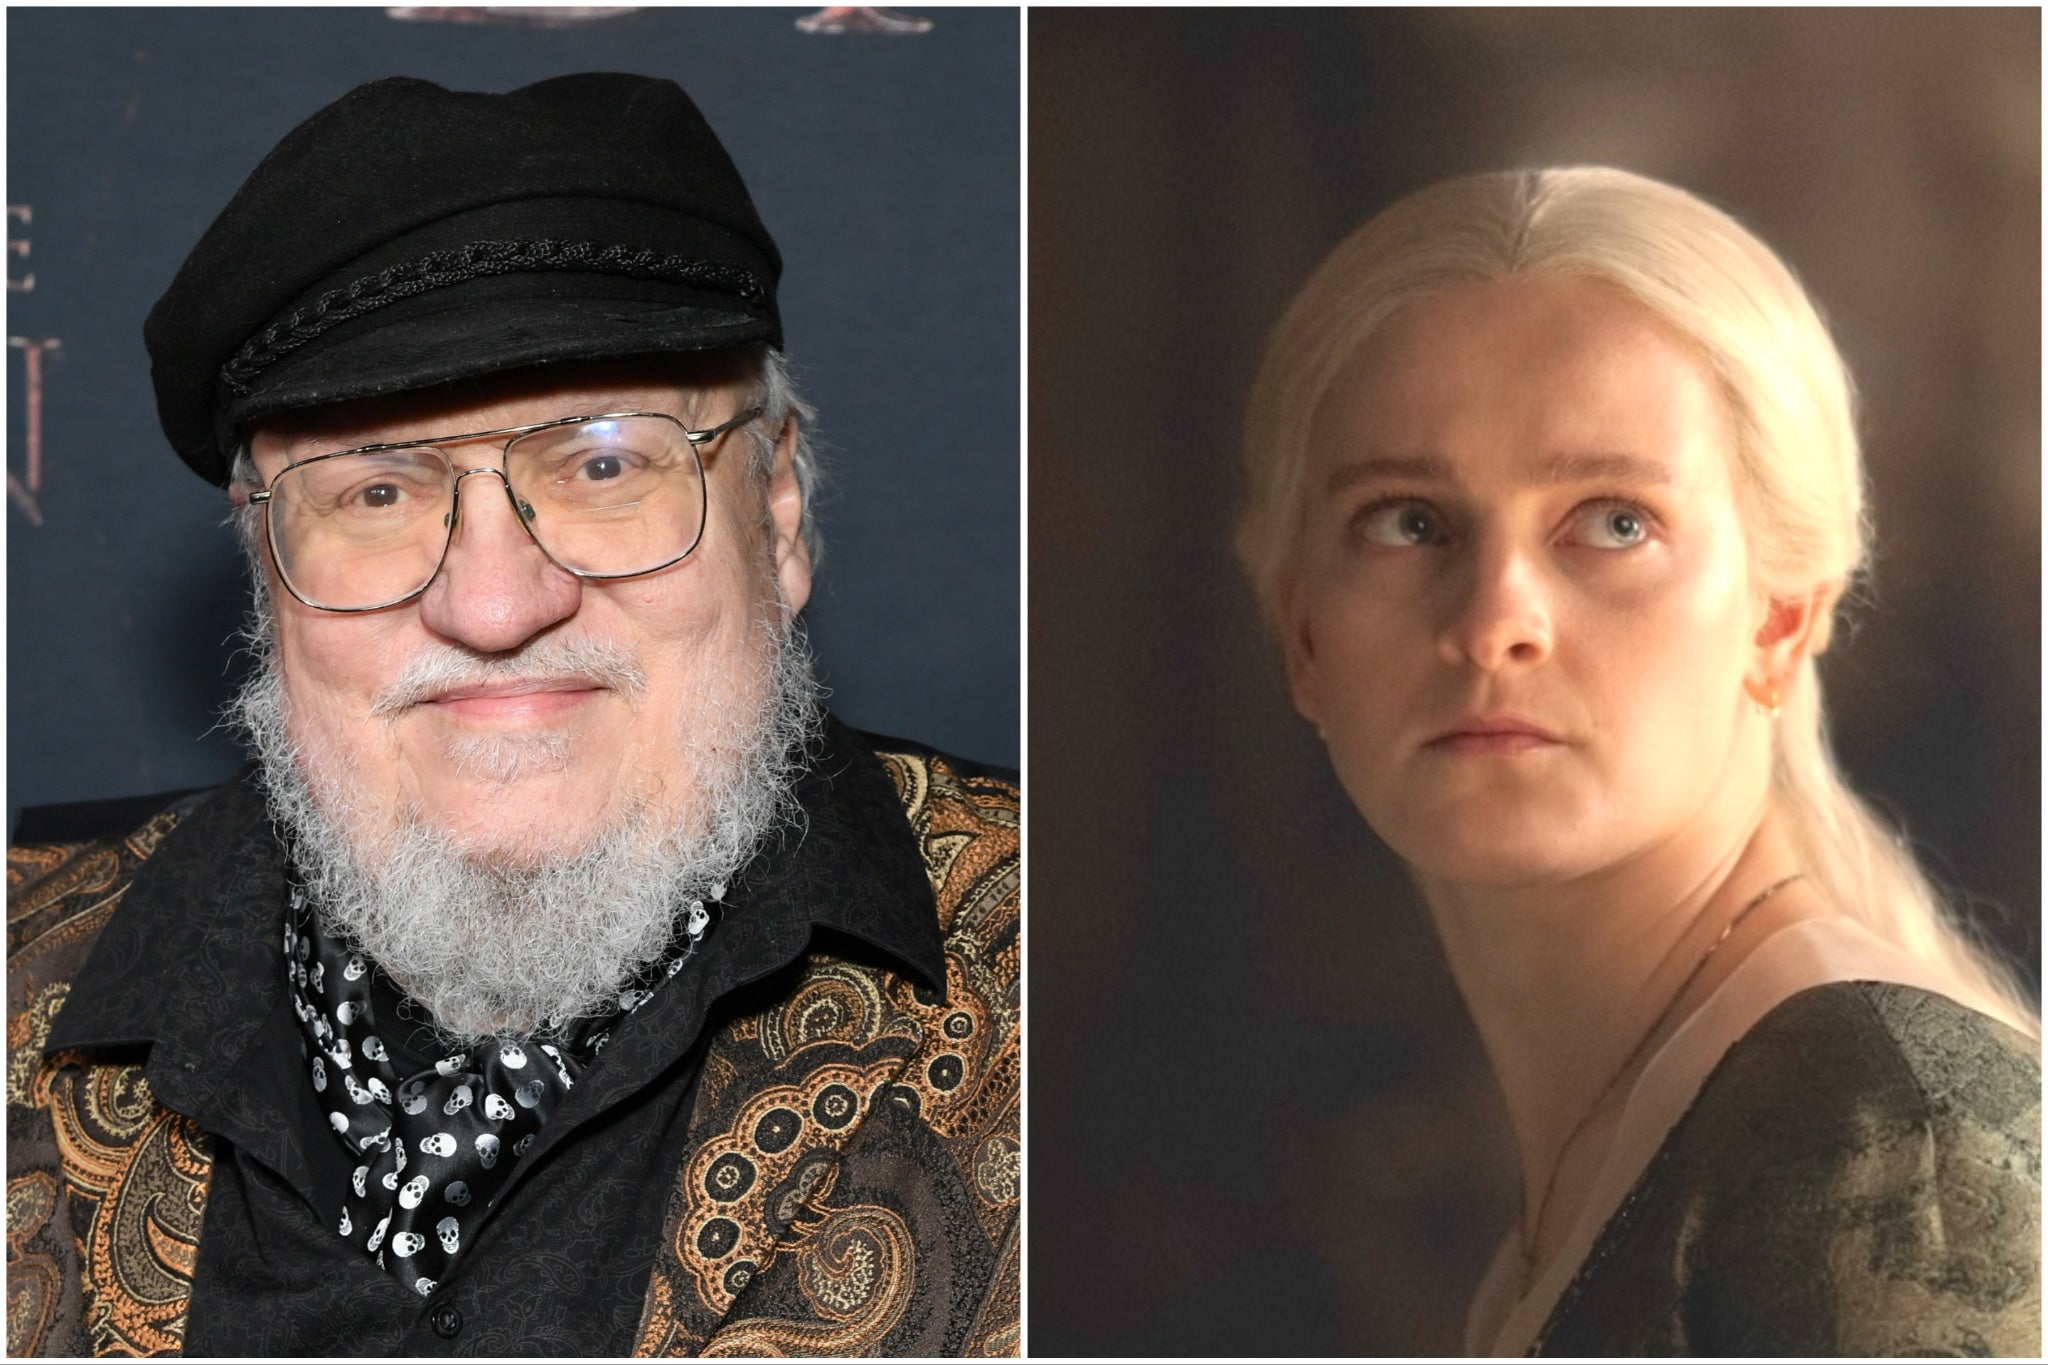 George RR Martin (left) and Phia Saban as Helaena Targaryen in HBO’s ‘House of the Dragon’